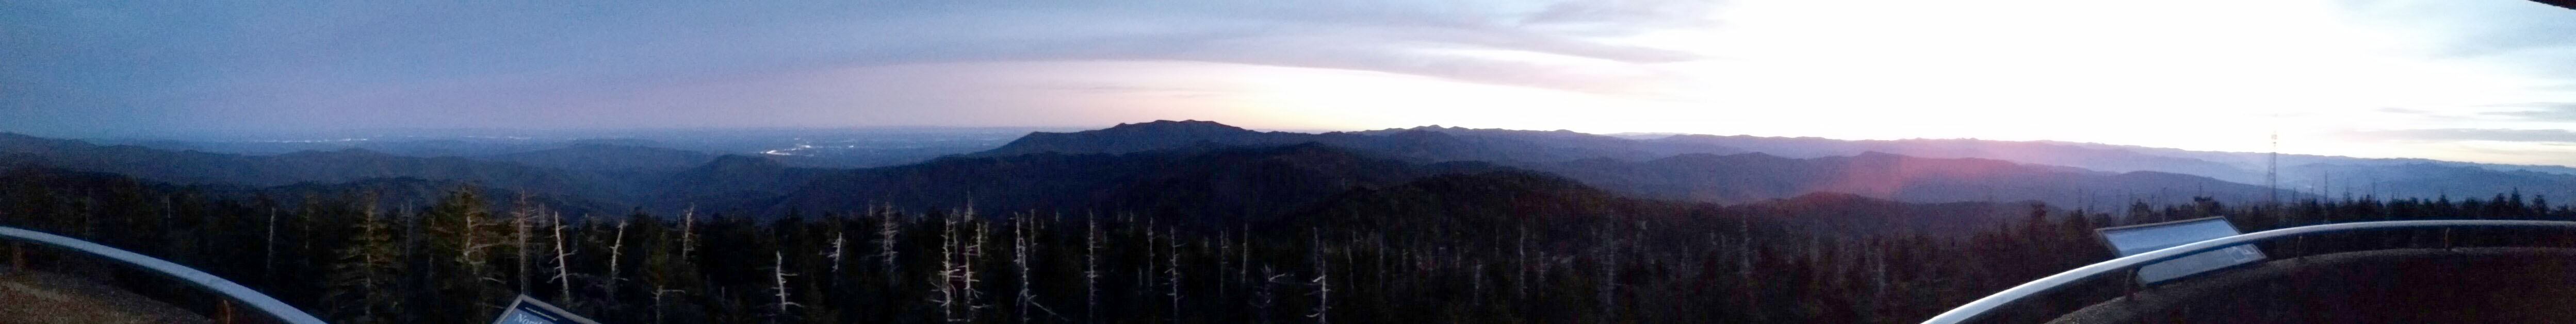 Panoramic photo from the Clingman's Dome tower overlook panning from northwest to the southeast with Mt Leconte prominent in the center and the Gatlinburg / Pigeon Forge area to its left.